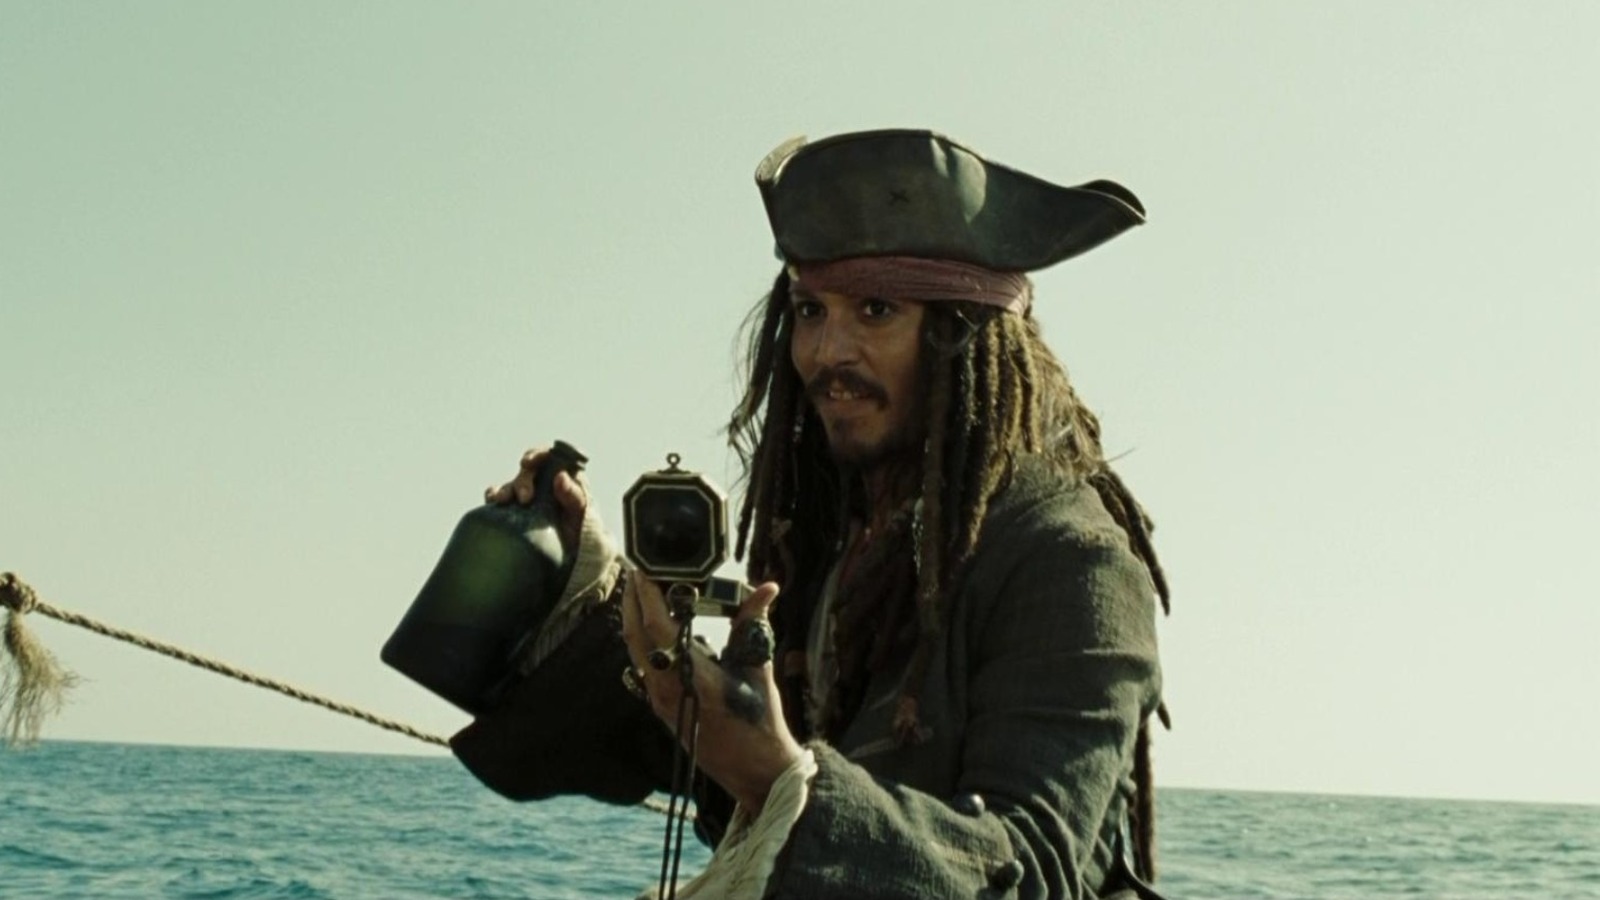 The fate of Jack Sparrow in the next Pirates of the Caribbean film is still uncertain